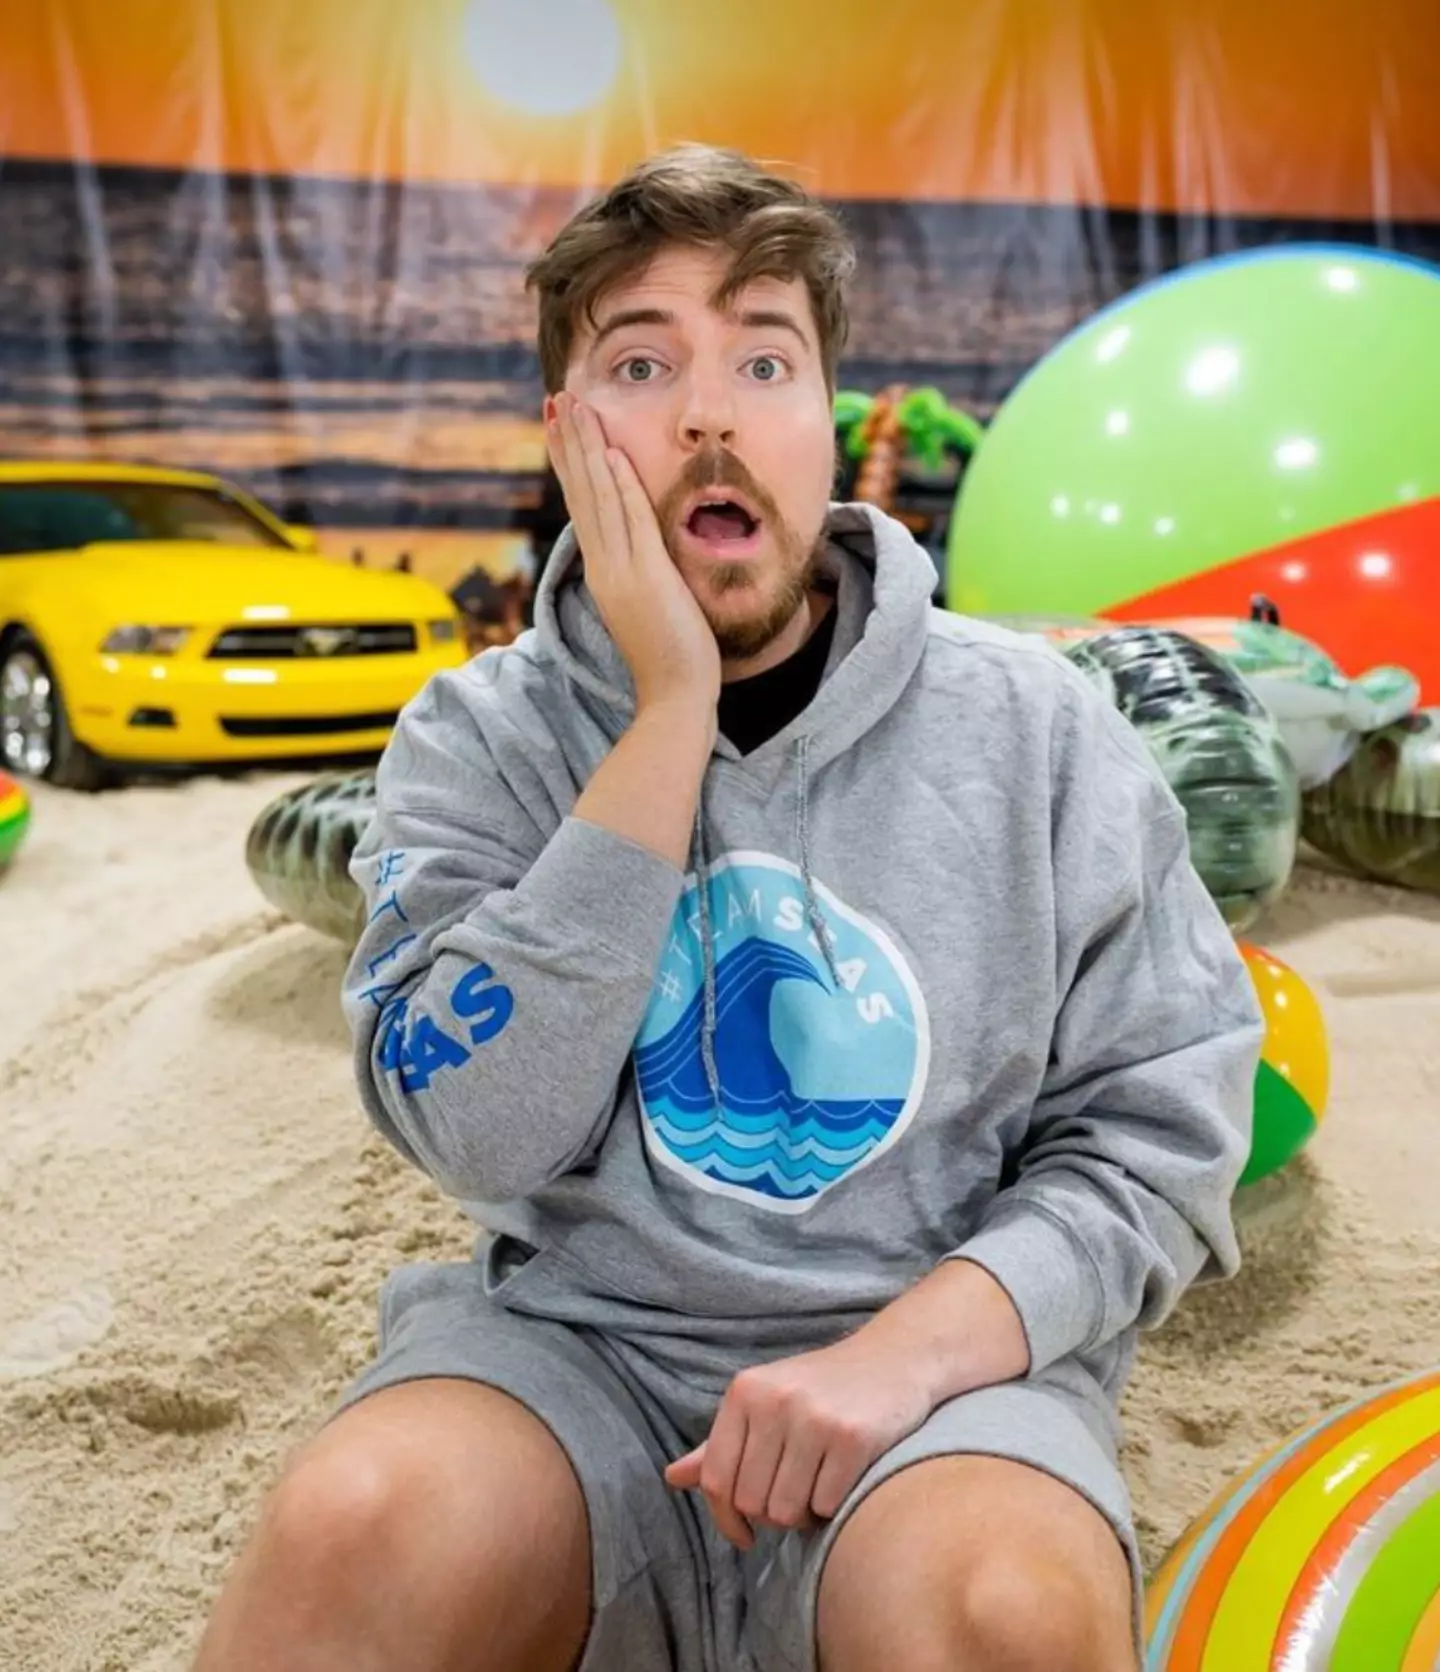 MrBeast revealed the 'crazy' business offer he rejected.